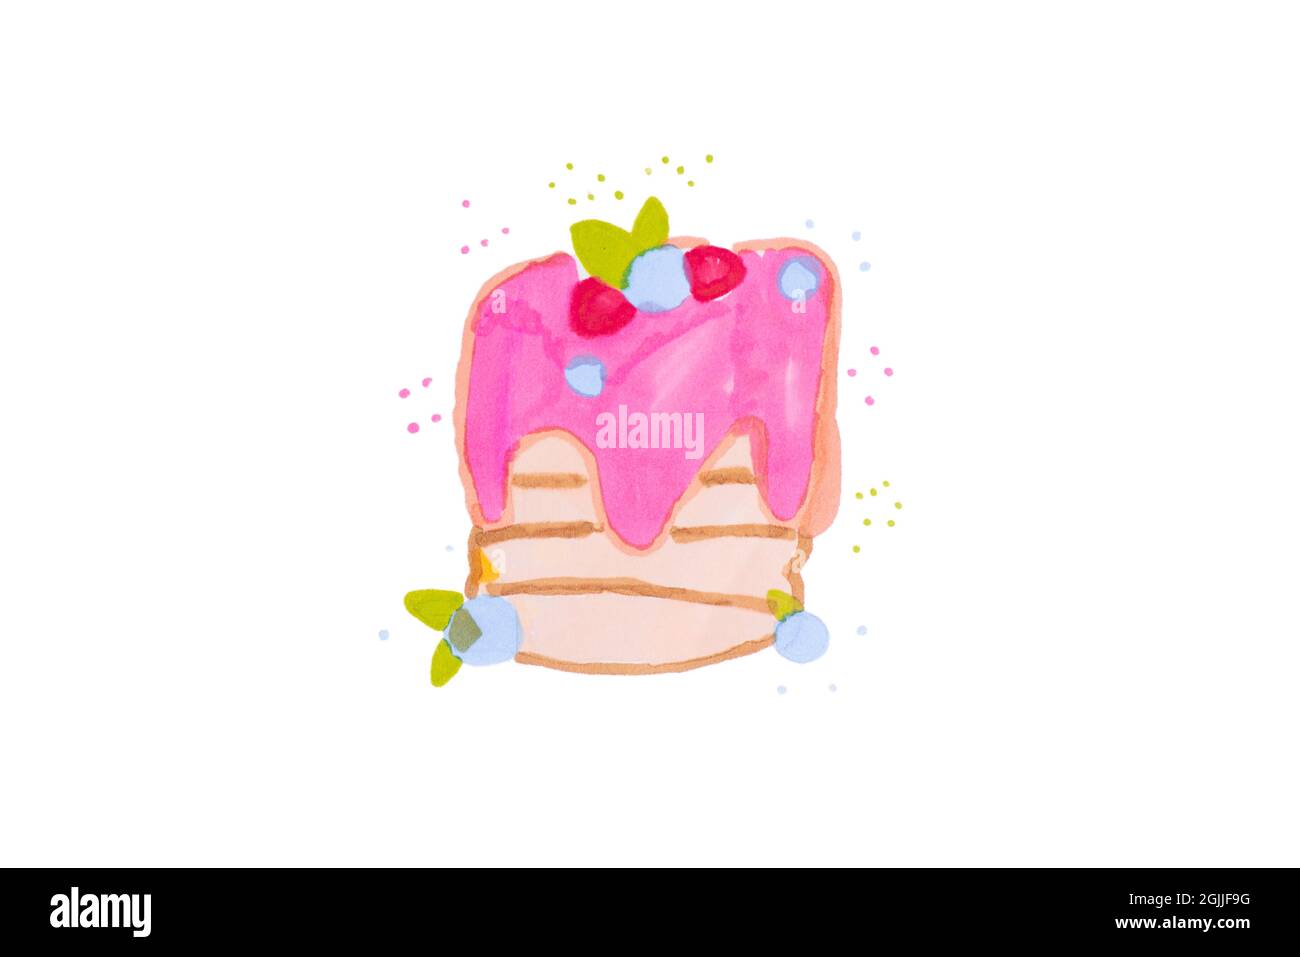 Child's drawing of a birthday cake, pastry with cream on a white background isolad.Child's drawing . Stock Photo